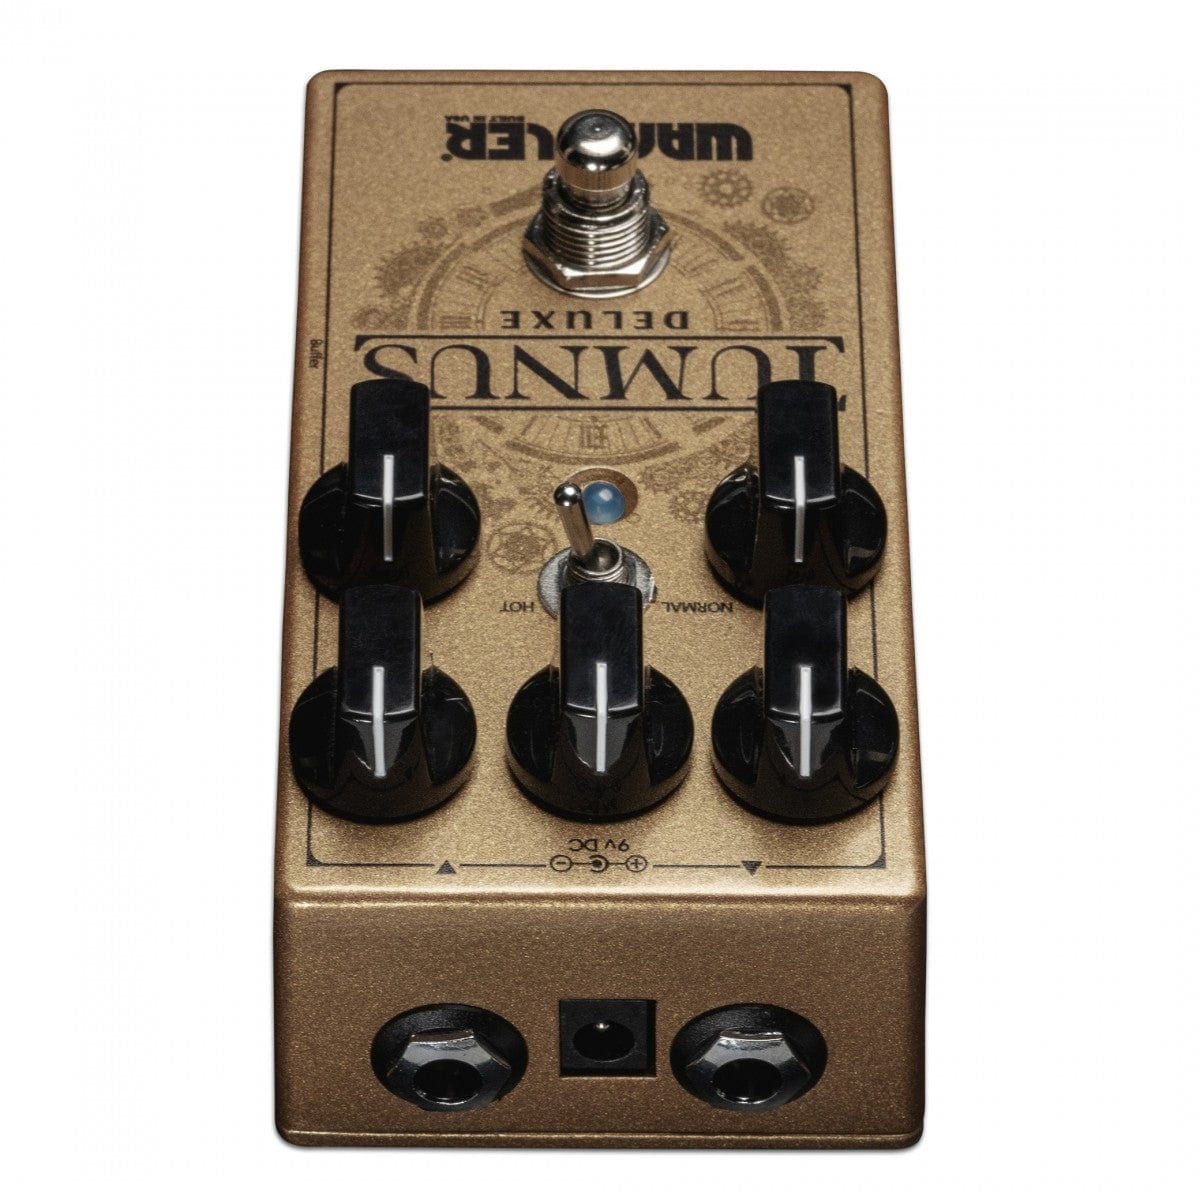 Wampler Tumnus Deluxe Overdrive Pedal | Bonners Music